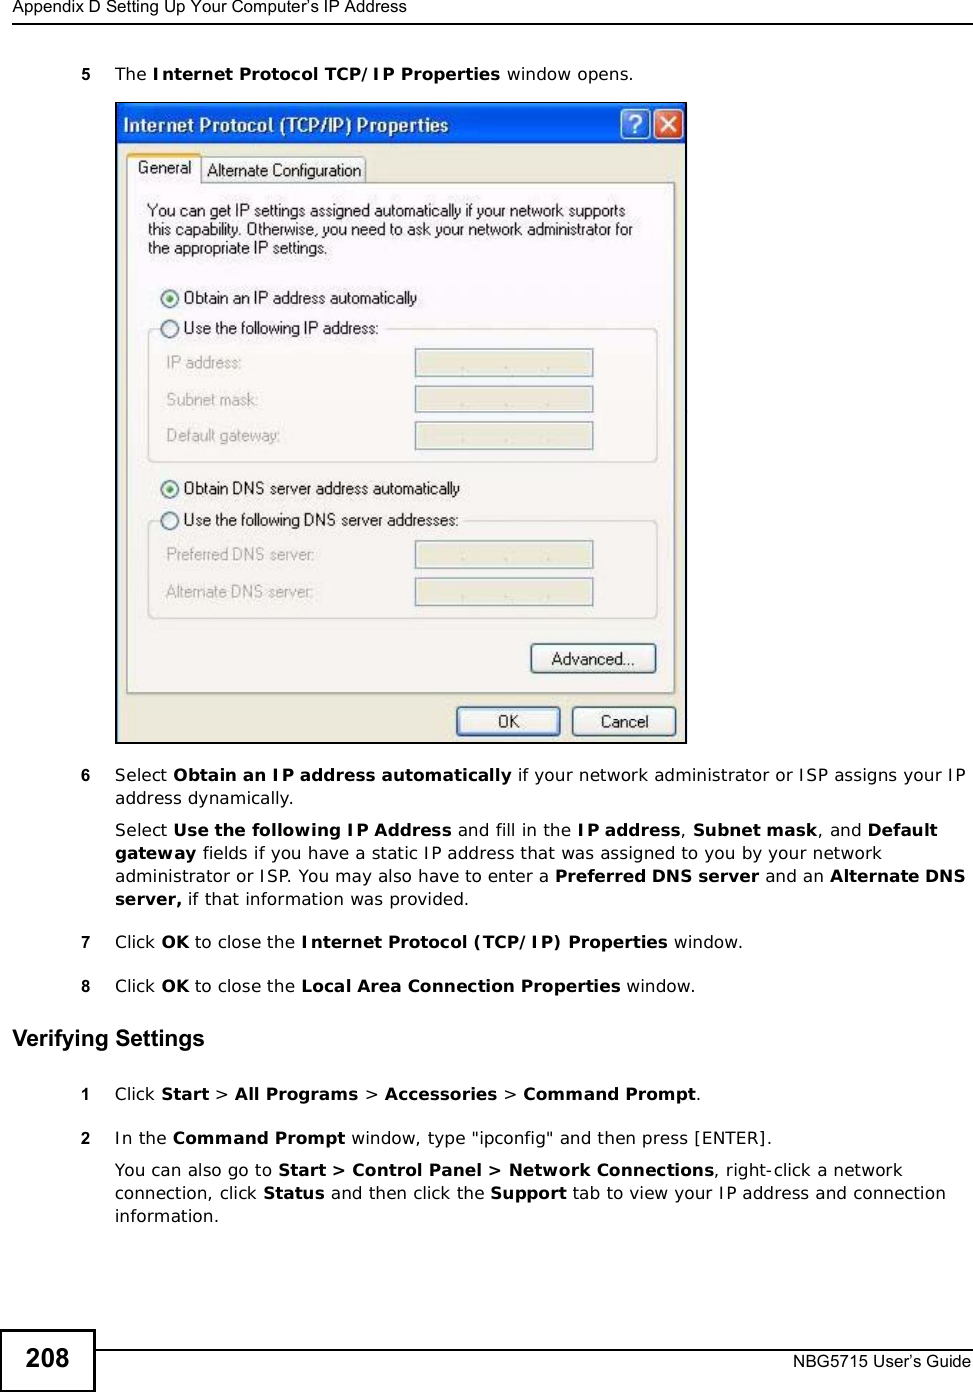 Appendix DSetting Up Your Computer’s IP AddressNBG5715 User’s Guide2085The Internet Protocol TCP/IP Properties window opens.6Select Obtain an IP address automatically if your network administrator or ISP assigns your IP address dynamically.Select Use the following IP Address and fill in the IP address,Subnet mask, and Default gateway fields if you have a static IP address that was assigned to you by your network administrator or ISP. You may also have to enter a Preferred DNS server and an AlternateDNSserver, if that information was provided.7Click OK to close the Internet Protocol (TCP/IP) Properties window.8Click OK to close the Local Area Connection Properties window.Verifying Settings1Click Start &gt; All Programs &gt; Accessories &gt; Command Prompt.2In the Command Prompt window, type &quot;ipconfig&quot; and then press [ENTER]. You can also go to Start &gt; Control Panel &gt; Network Connections, right-click a network connection, click Status and then click the Support tab to view your IP address and connection information.